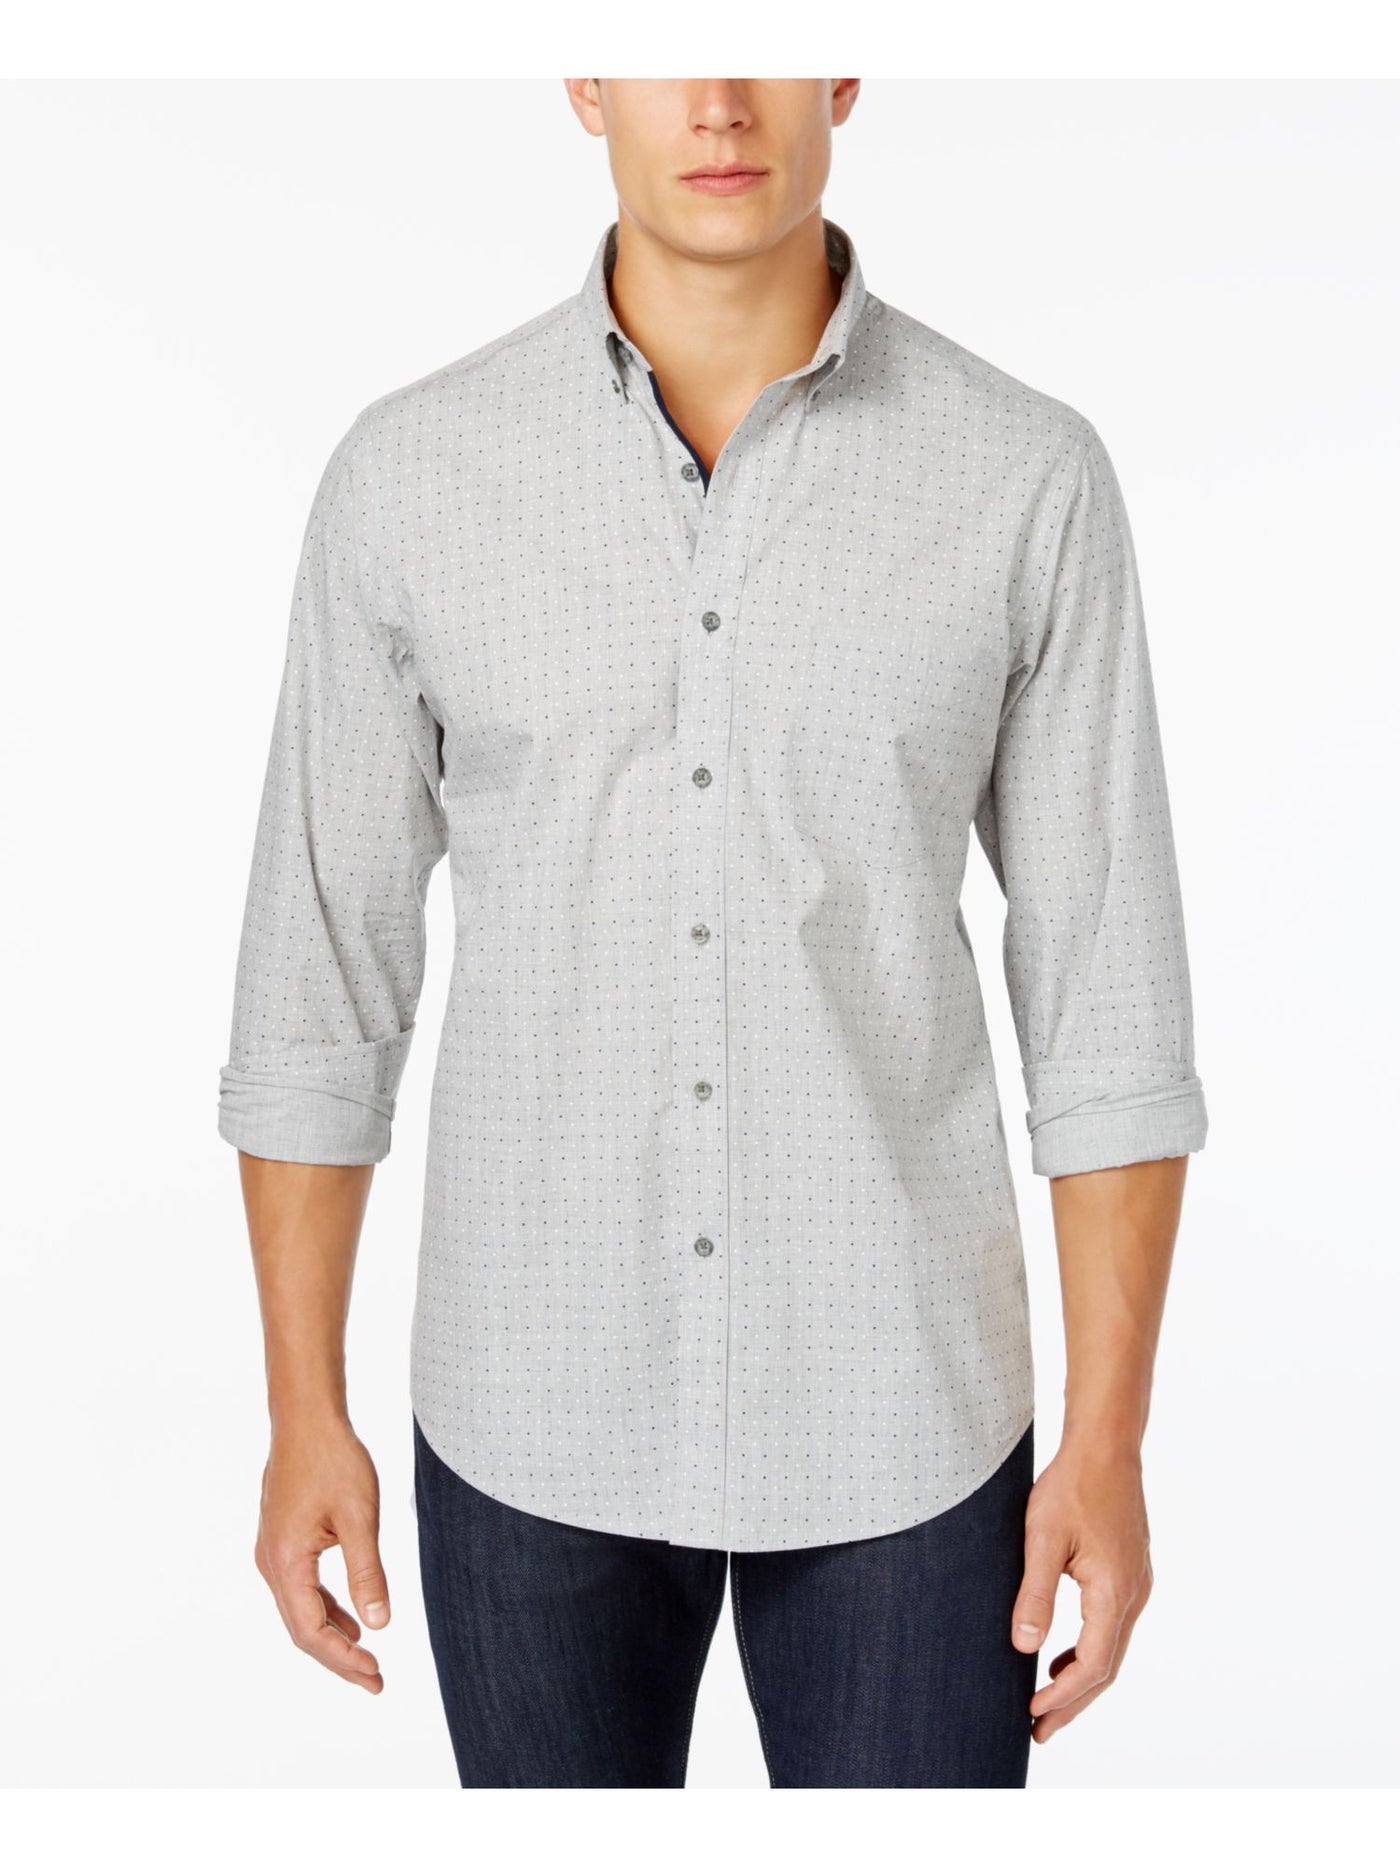 CLUBROOM Mens Gray Collared Button Down Shirt S